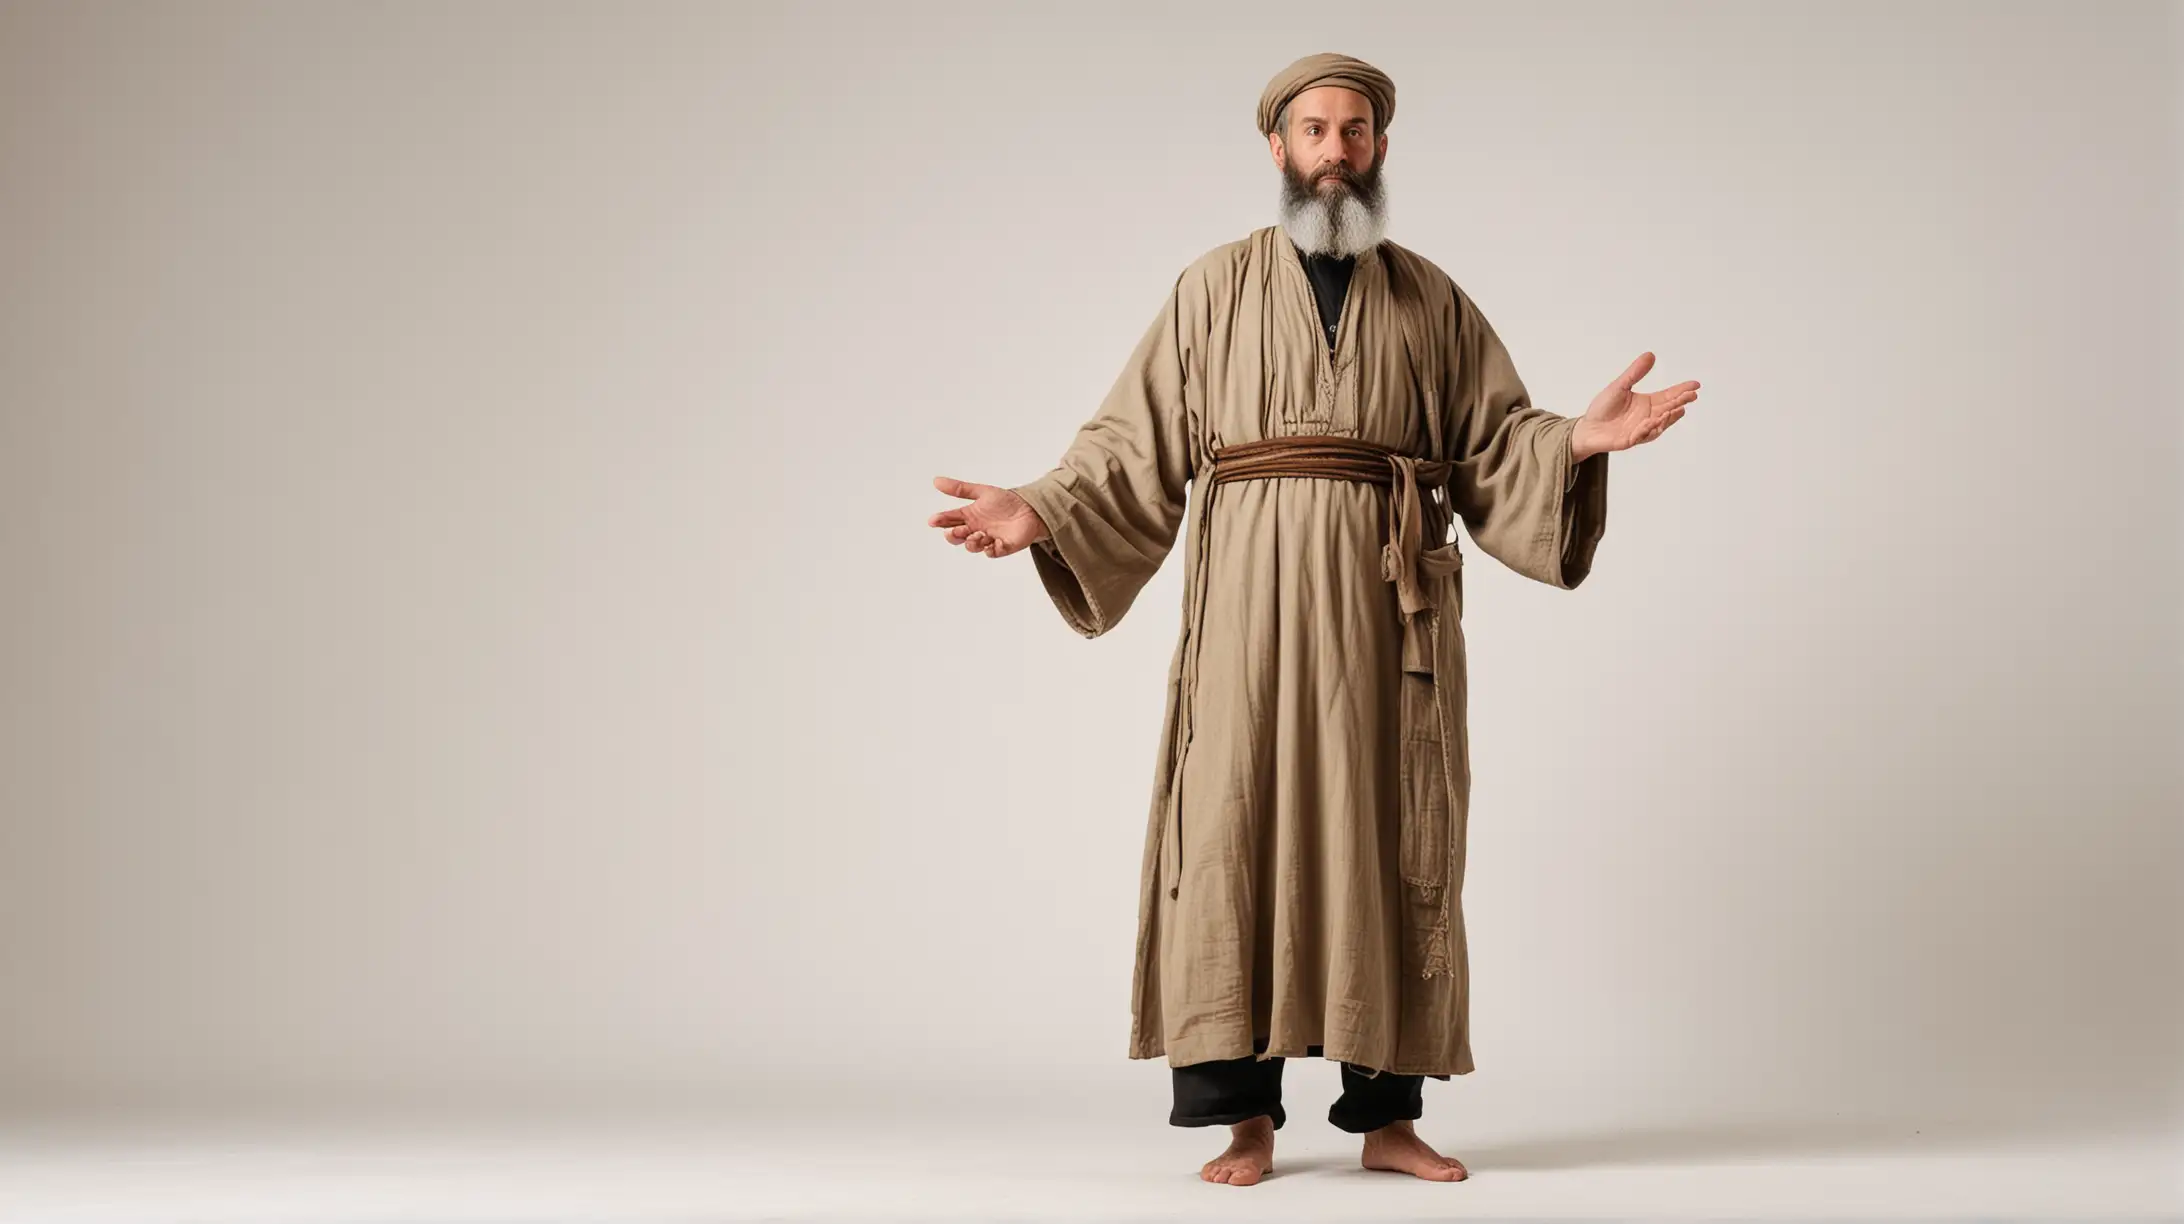 Ancient Hebrew Priest Aaron Standing Barefoot on White Background